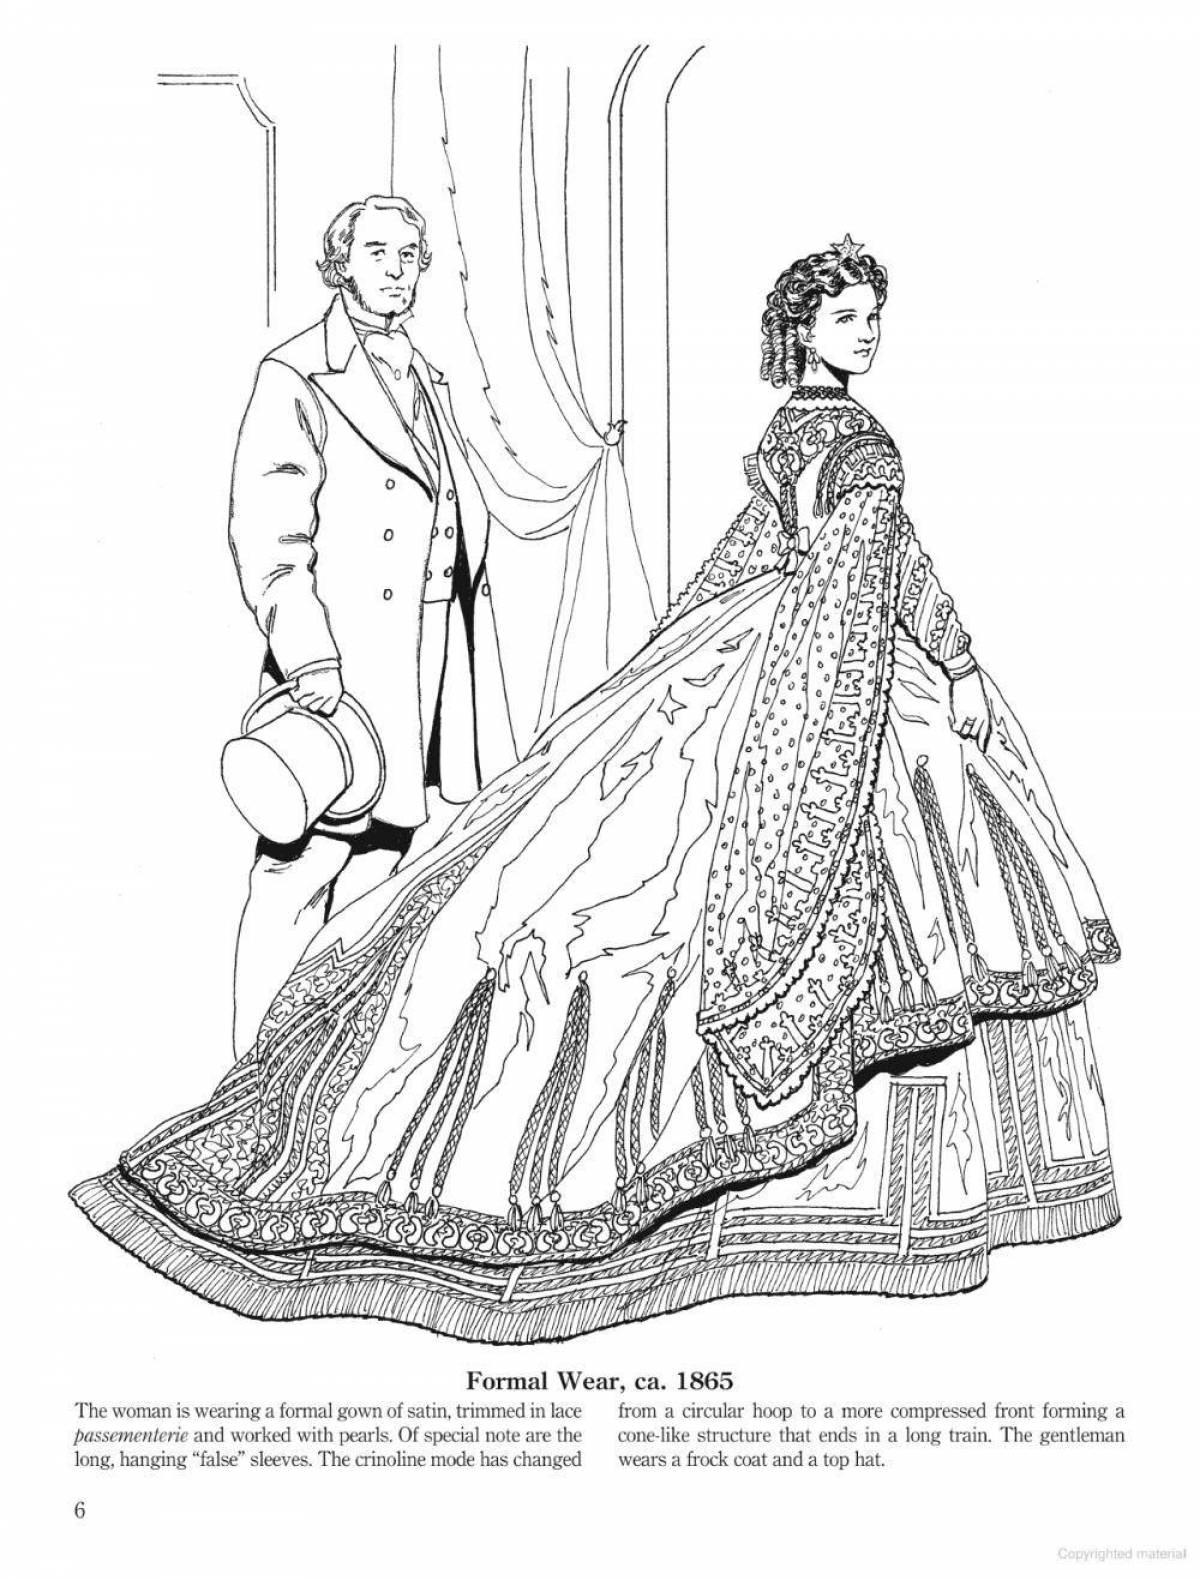 Charming 18th century costume coloring book